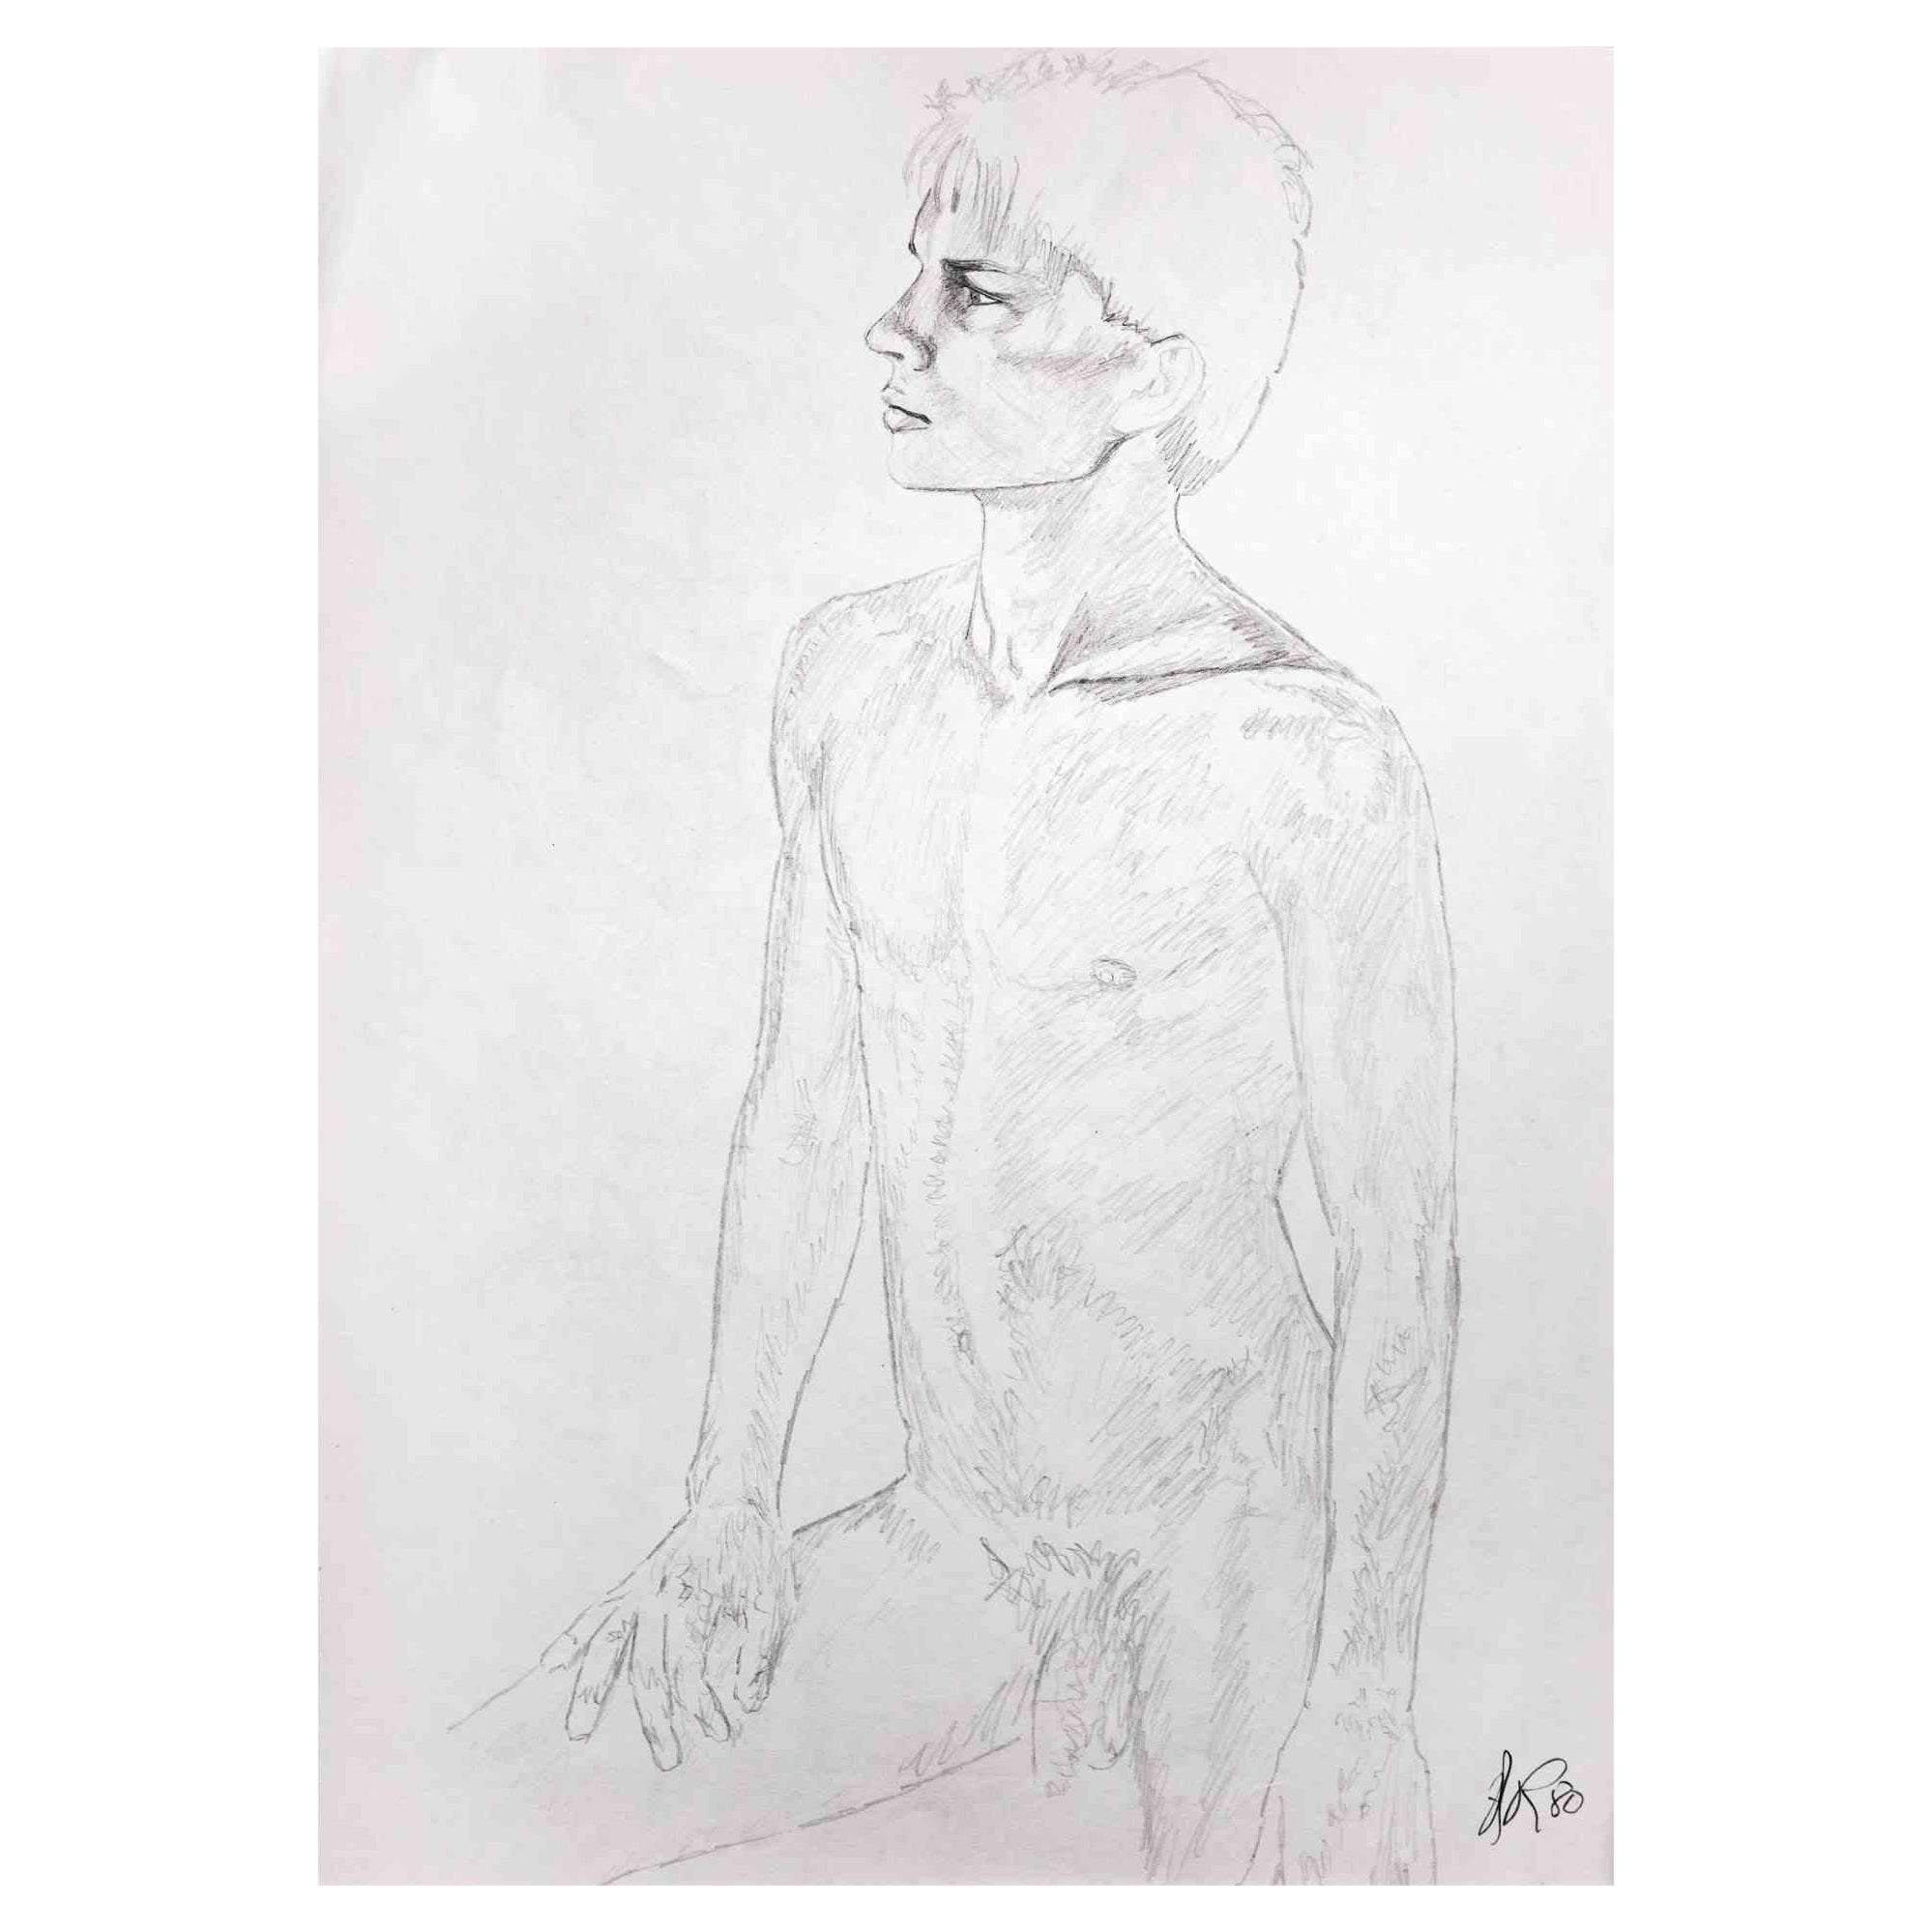 Portrait of a boy  is an original drawing in pencil realized by Anthony Roaland in 1980. Hand-signed and dated by the artist on the lower right margin. 

In the foreground the figure turned to the left and is depicted with a delicate style.

Good